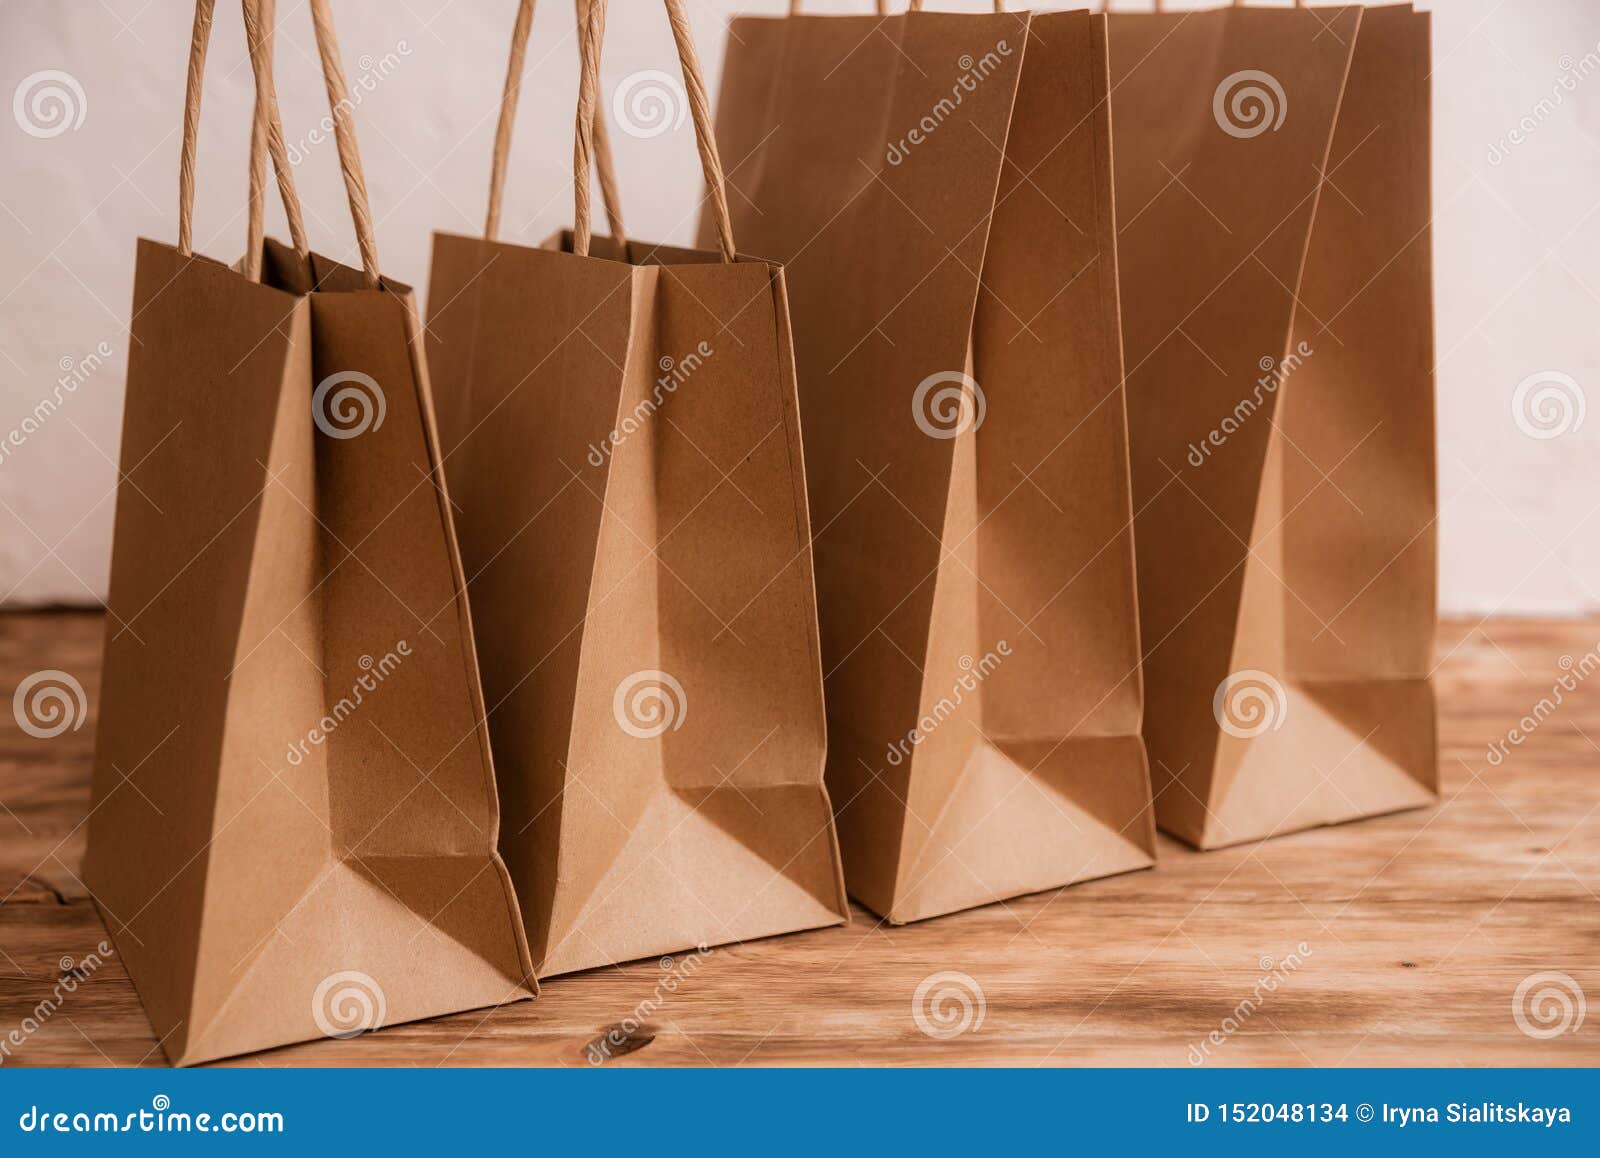 Download Mock-up Of Brown Craft Paper Package With Handles, Empty ...